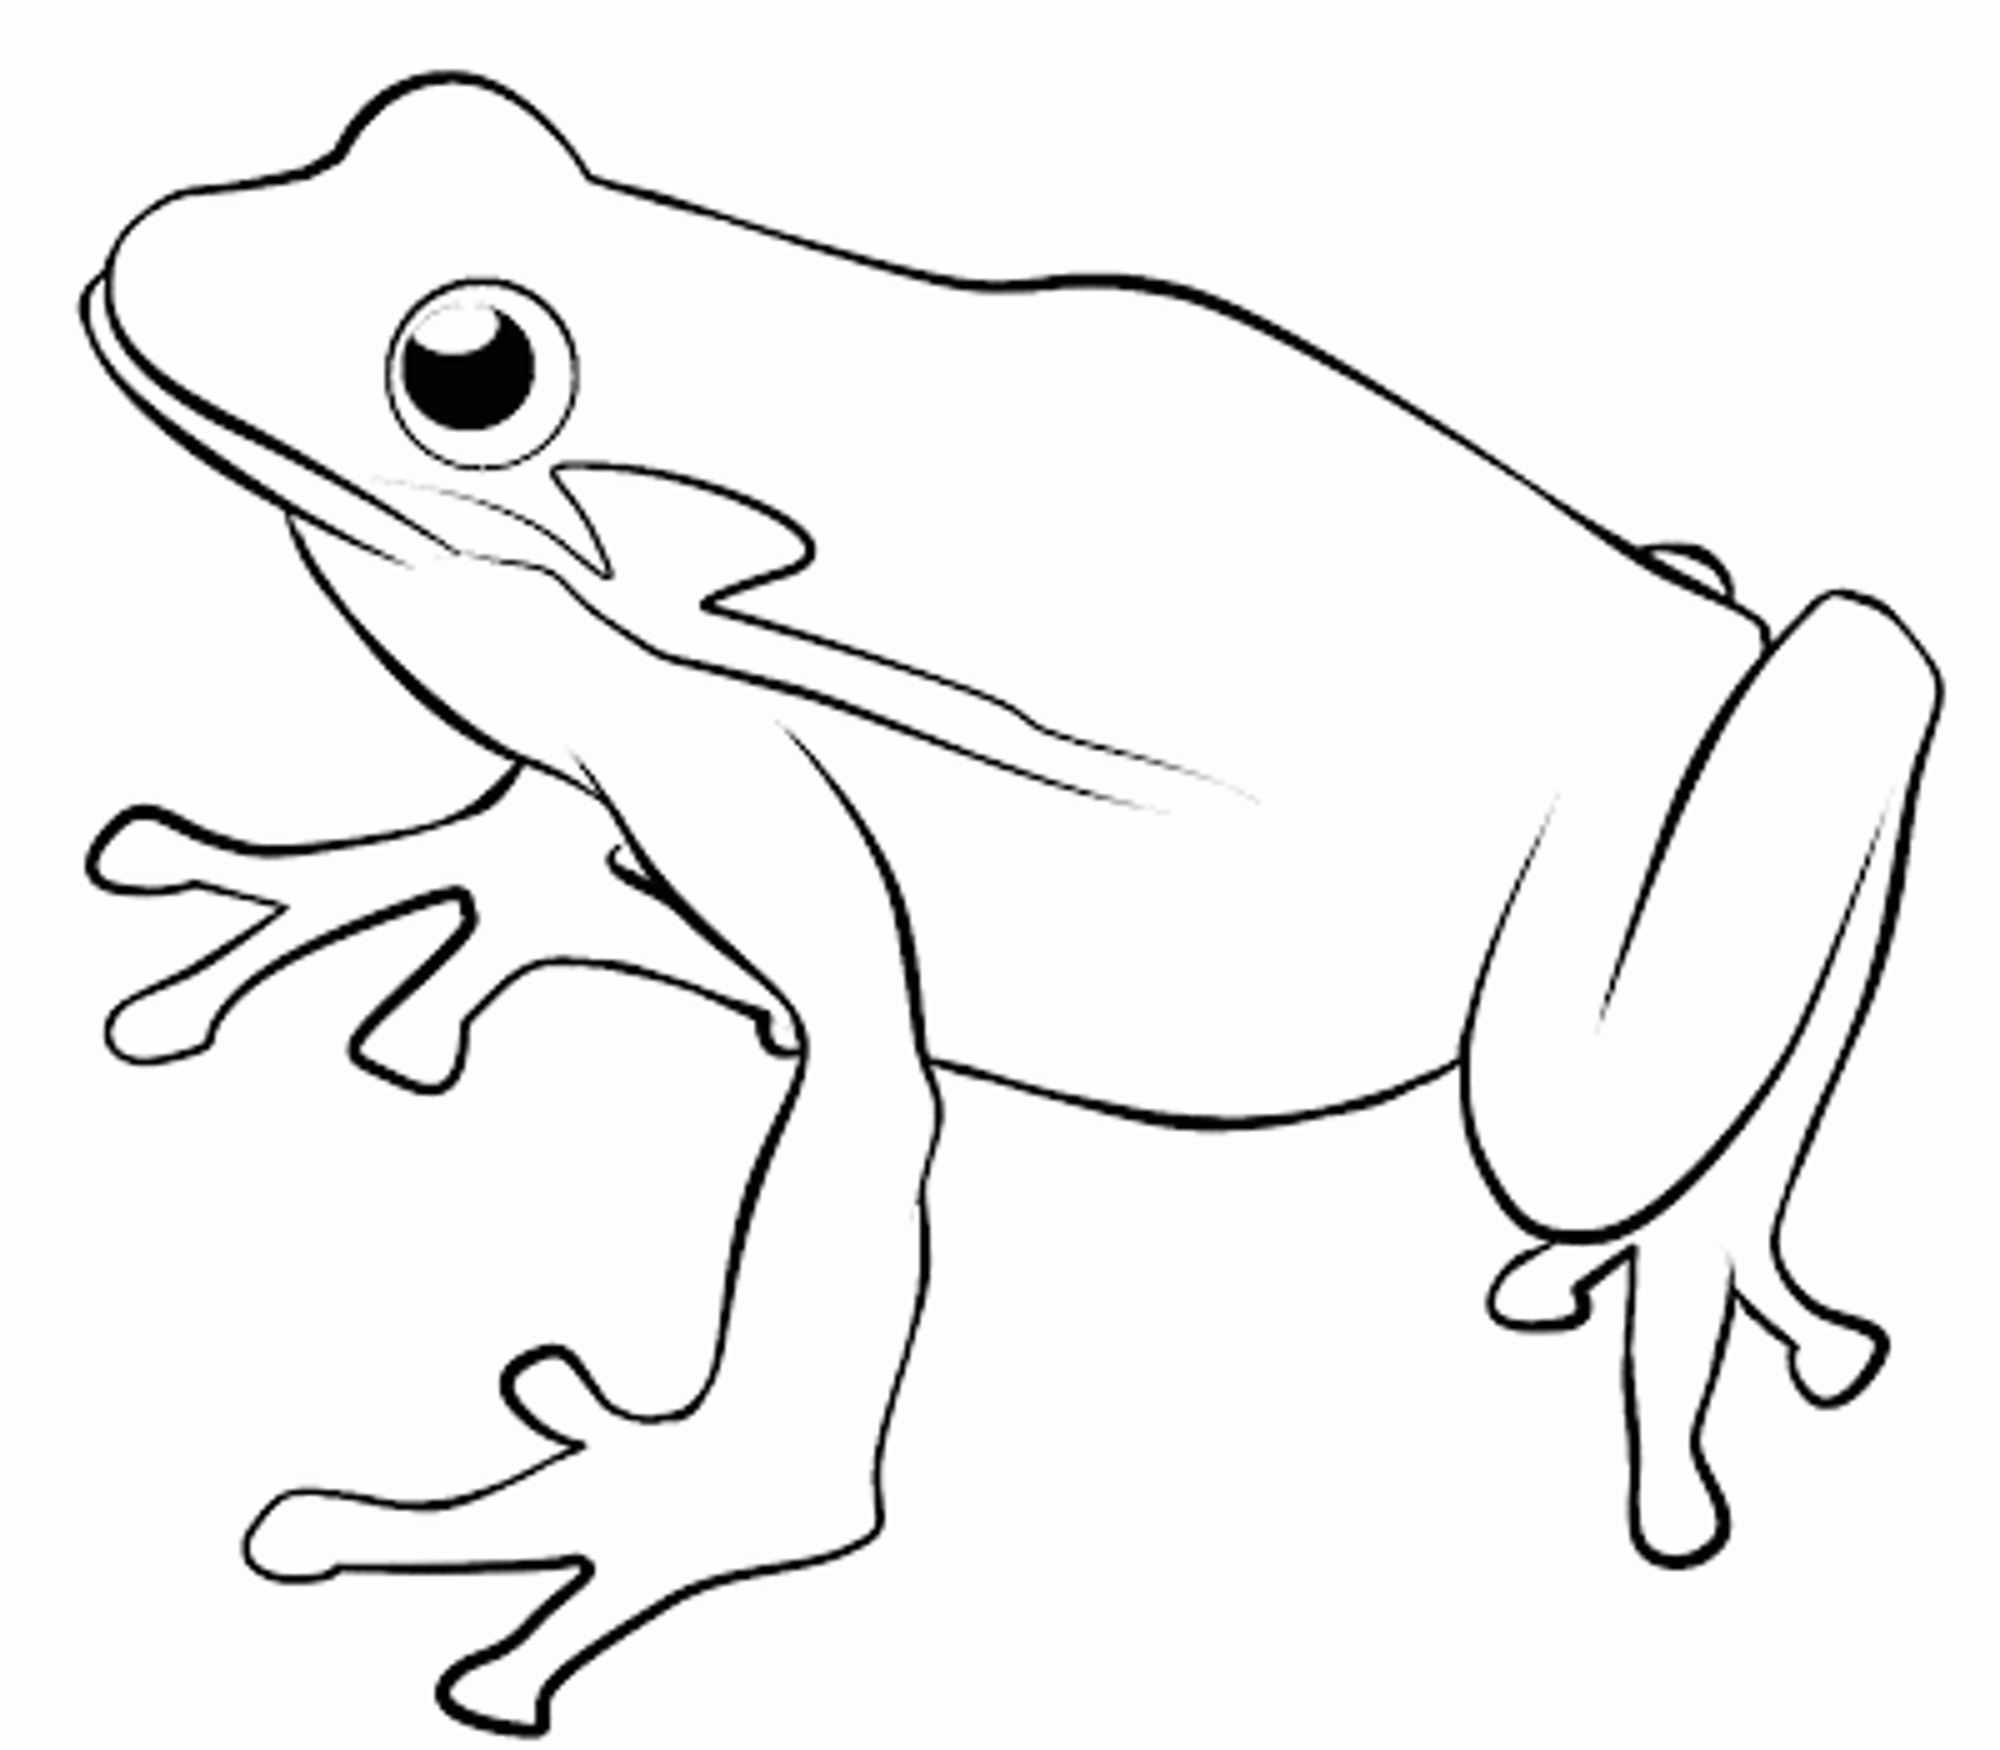 Frog Coloring Sheet
 Print & Download Frog Coloring Pages Theme for Kids